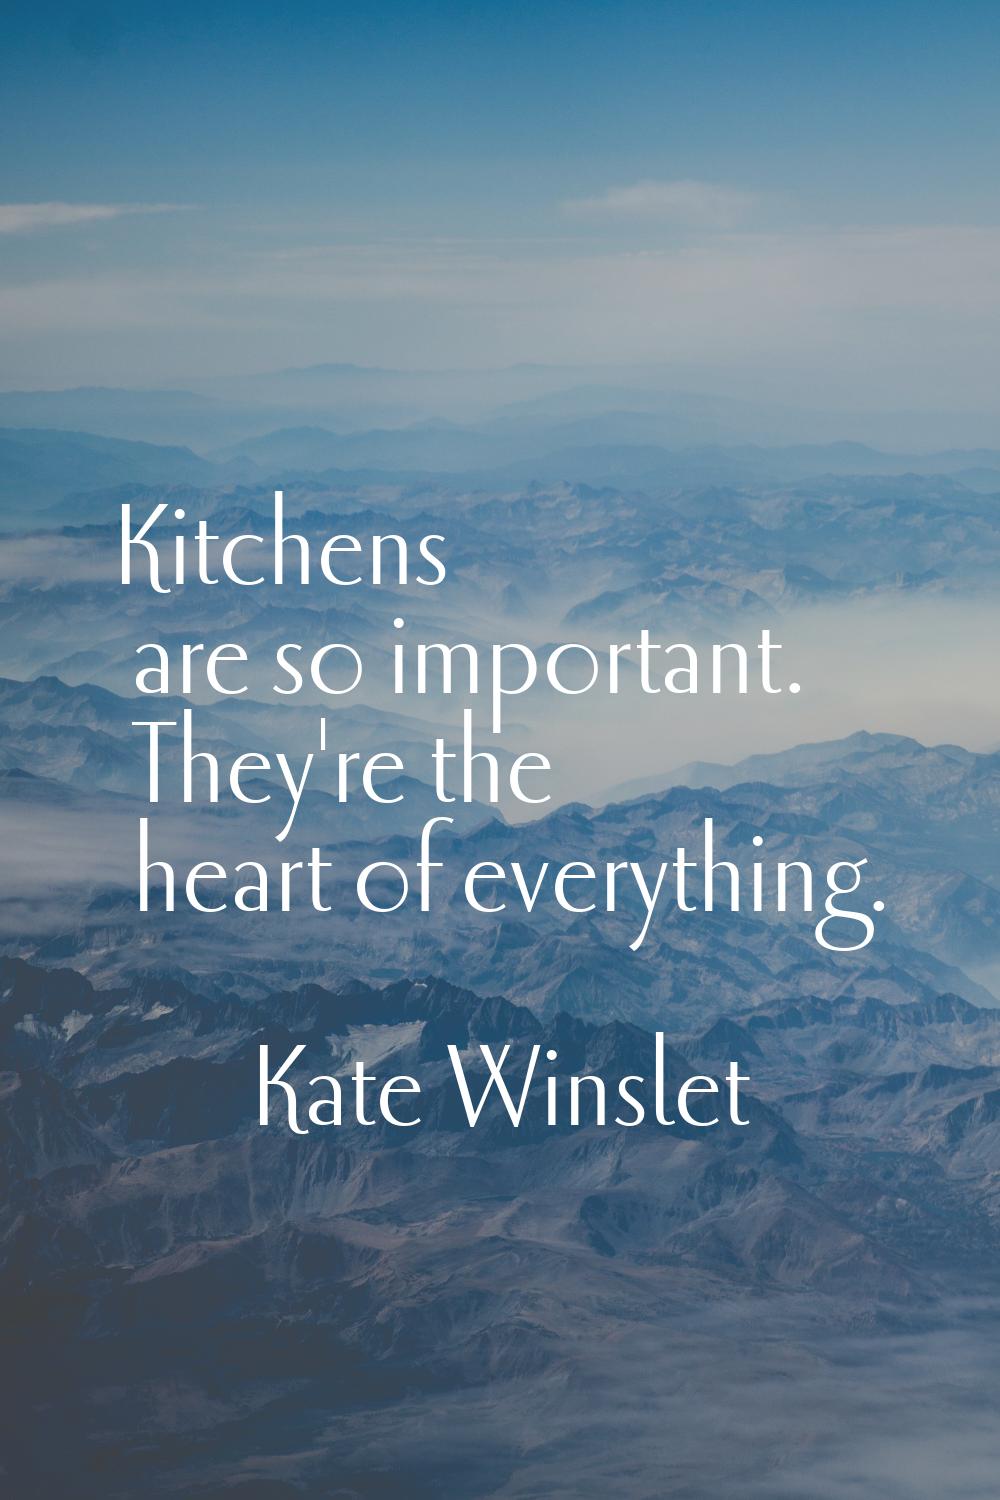 Kitchens are so important. They're the heart of everything.